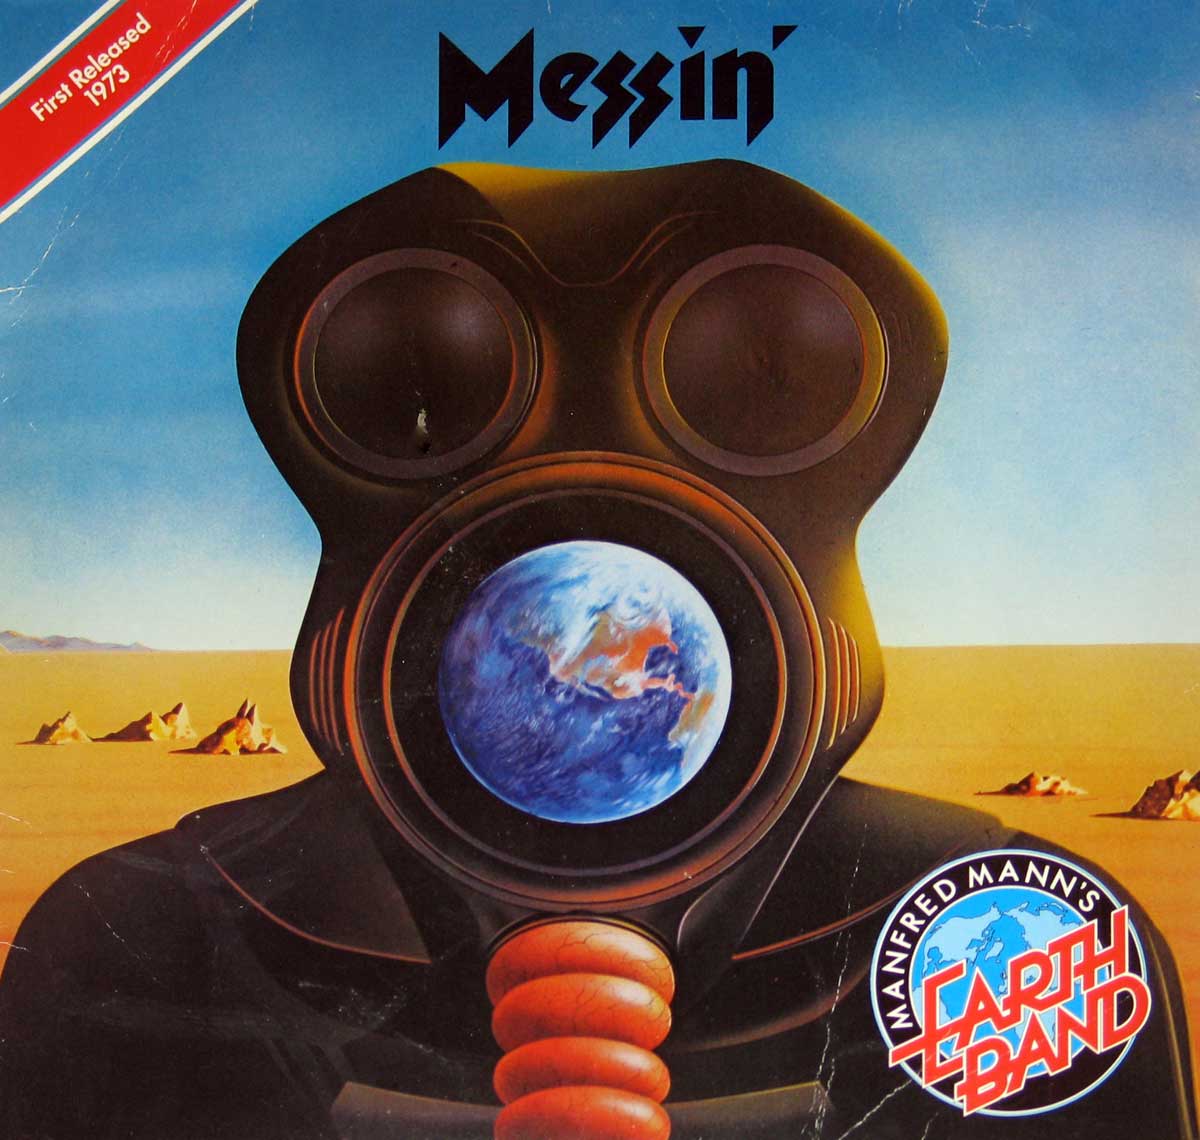 large album front cover photo of: Manfred Mann's Earth Band - Messin' Bronze Records re-issue 